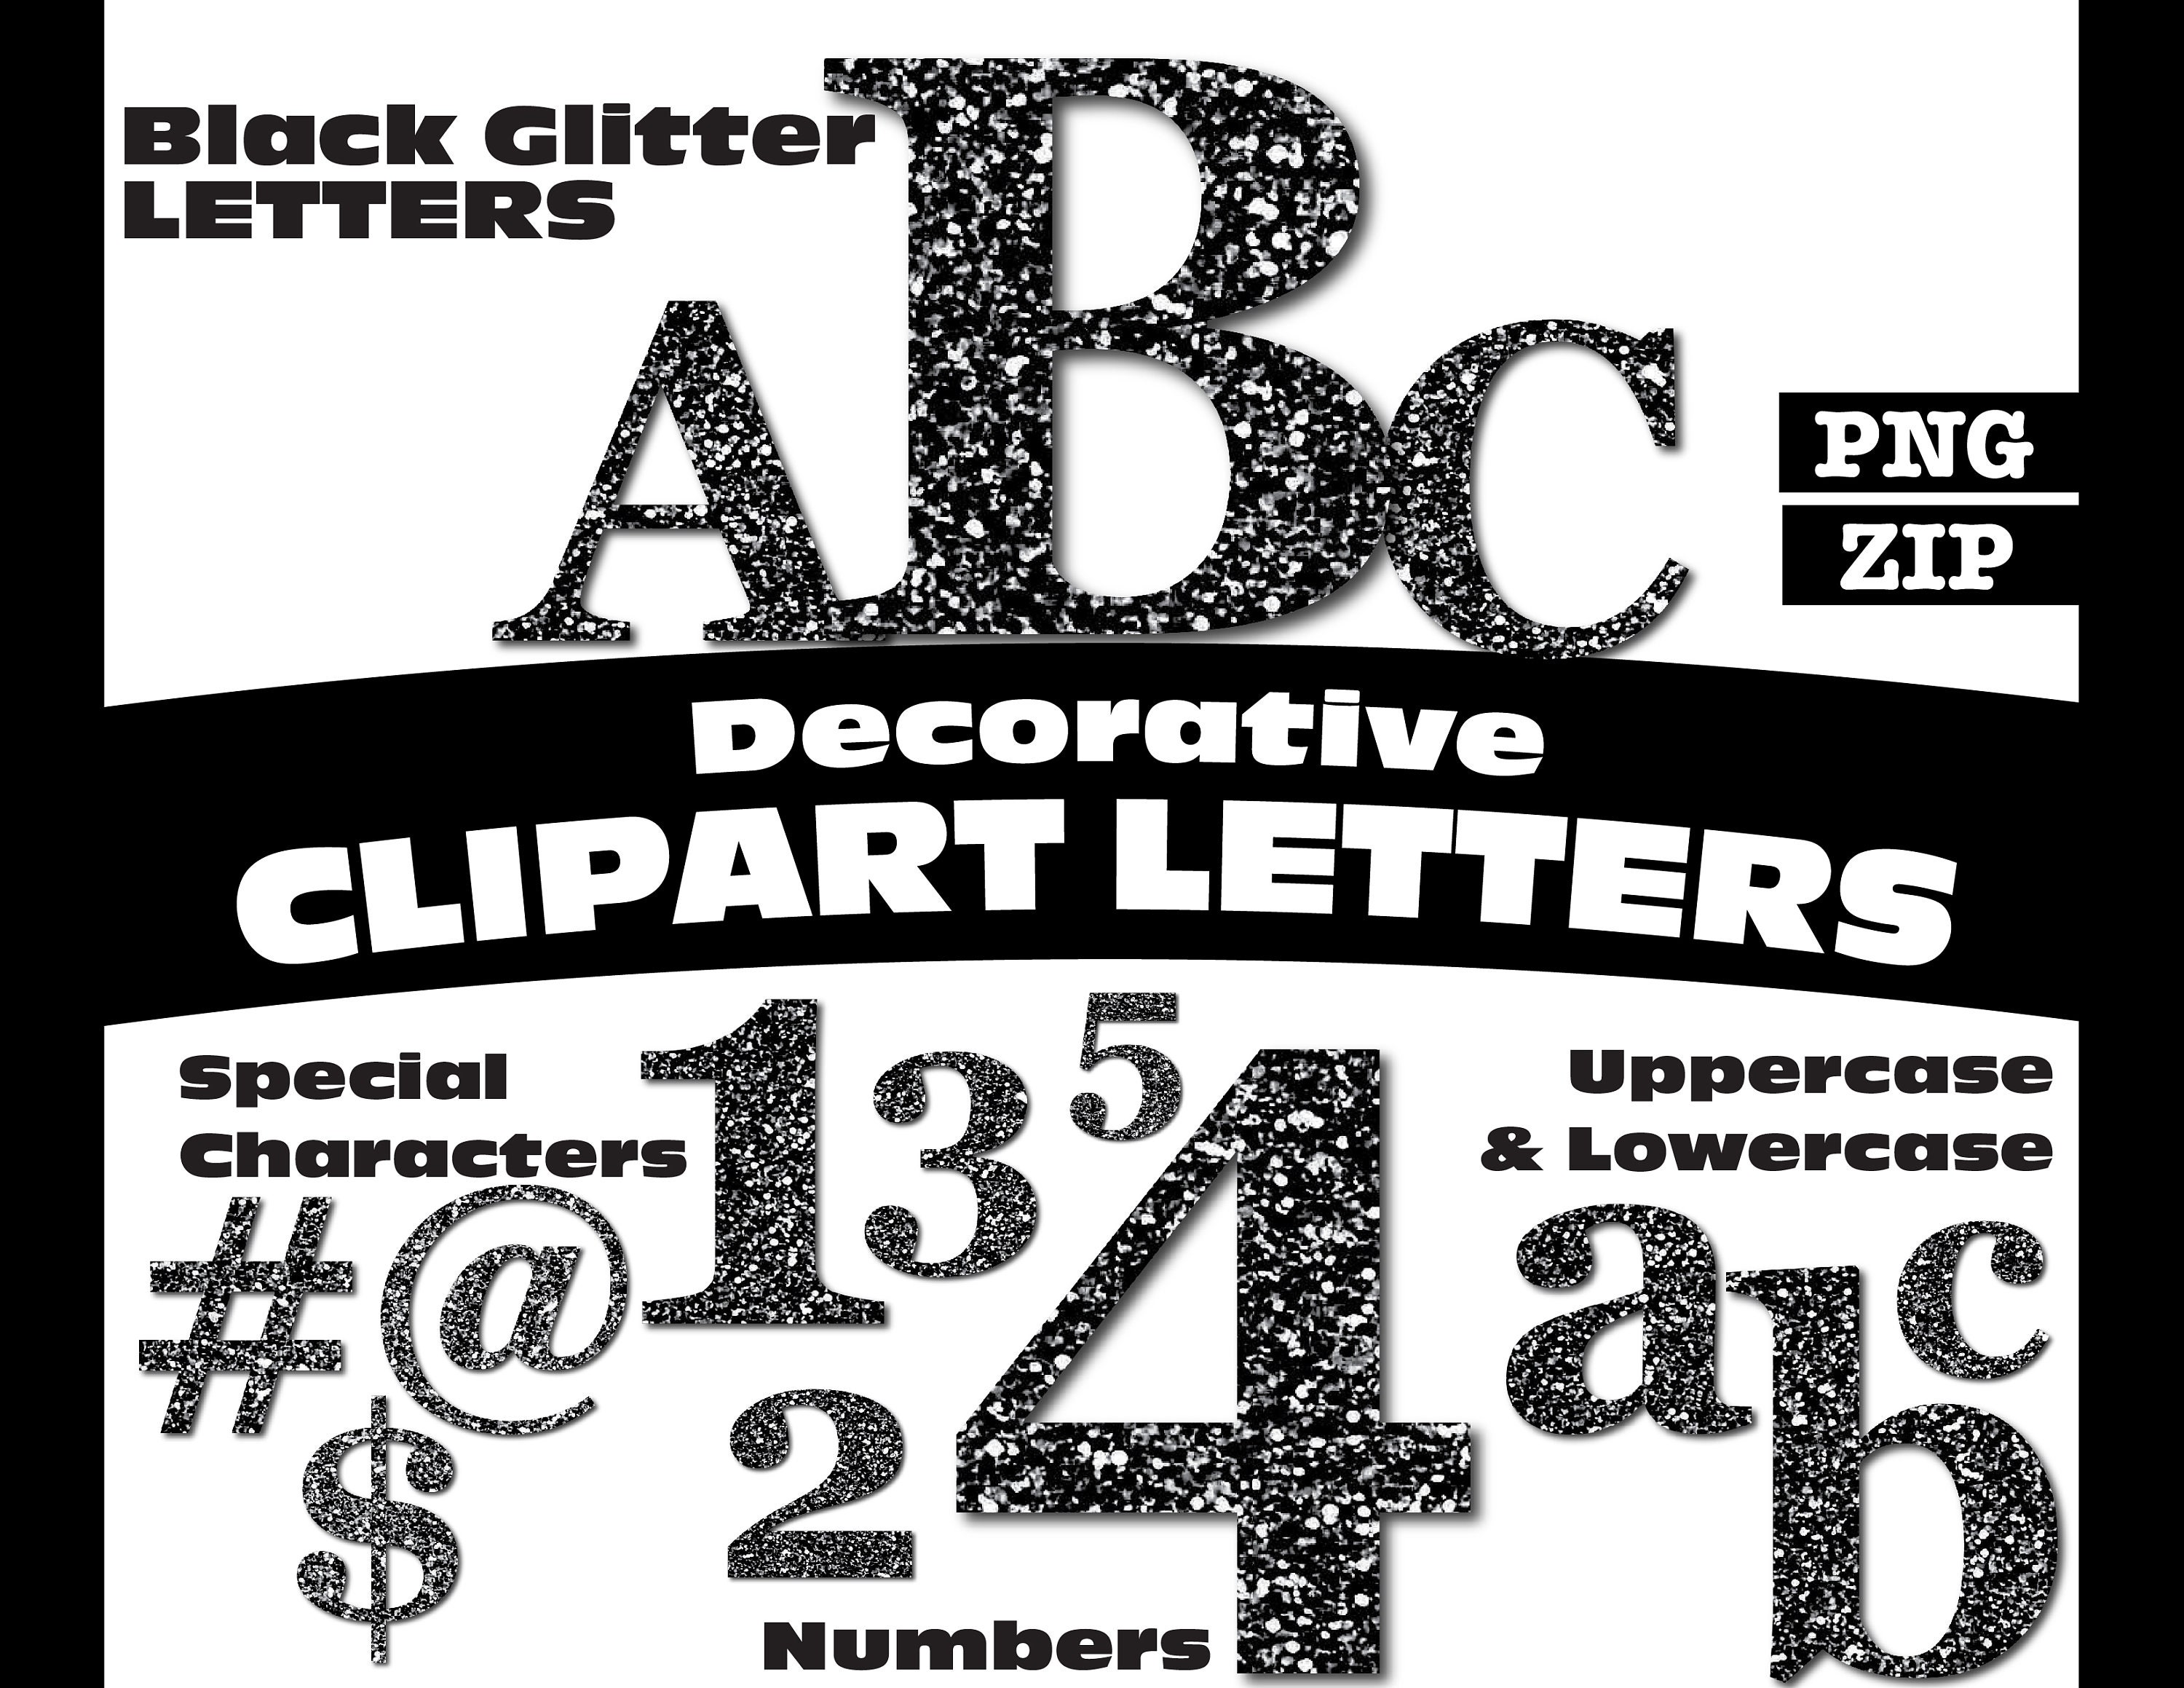 12 Packs: 48 ct. (576 total) 1 Iron-On Gold Glitter Letters by